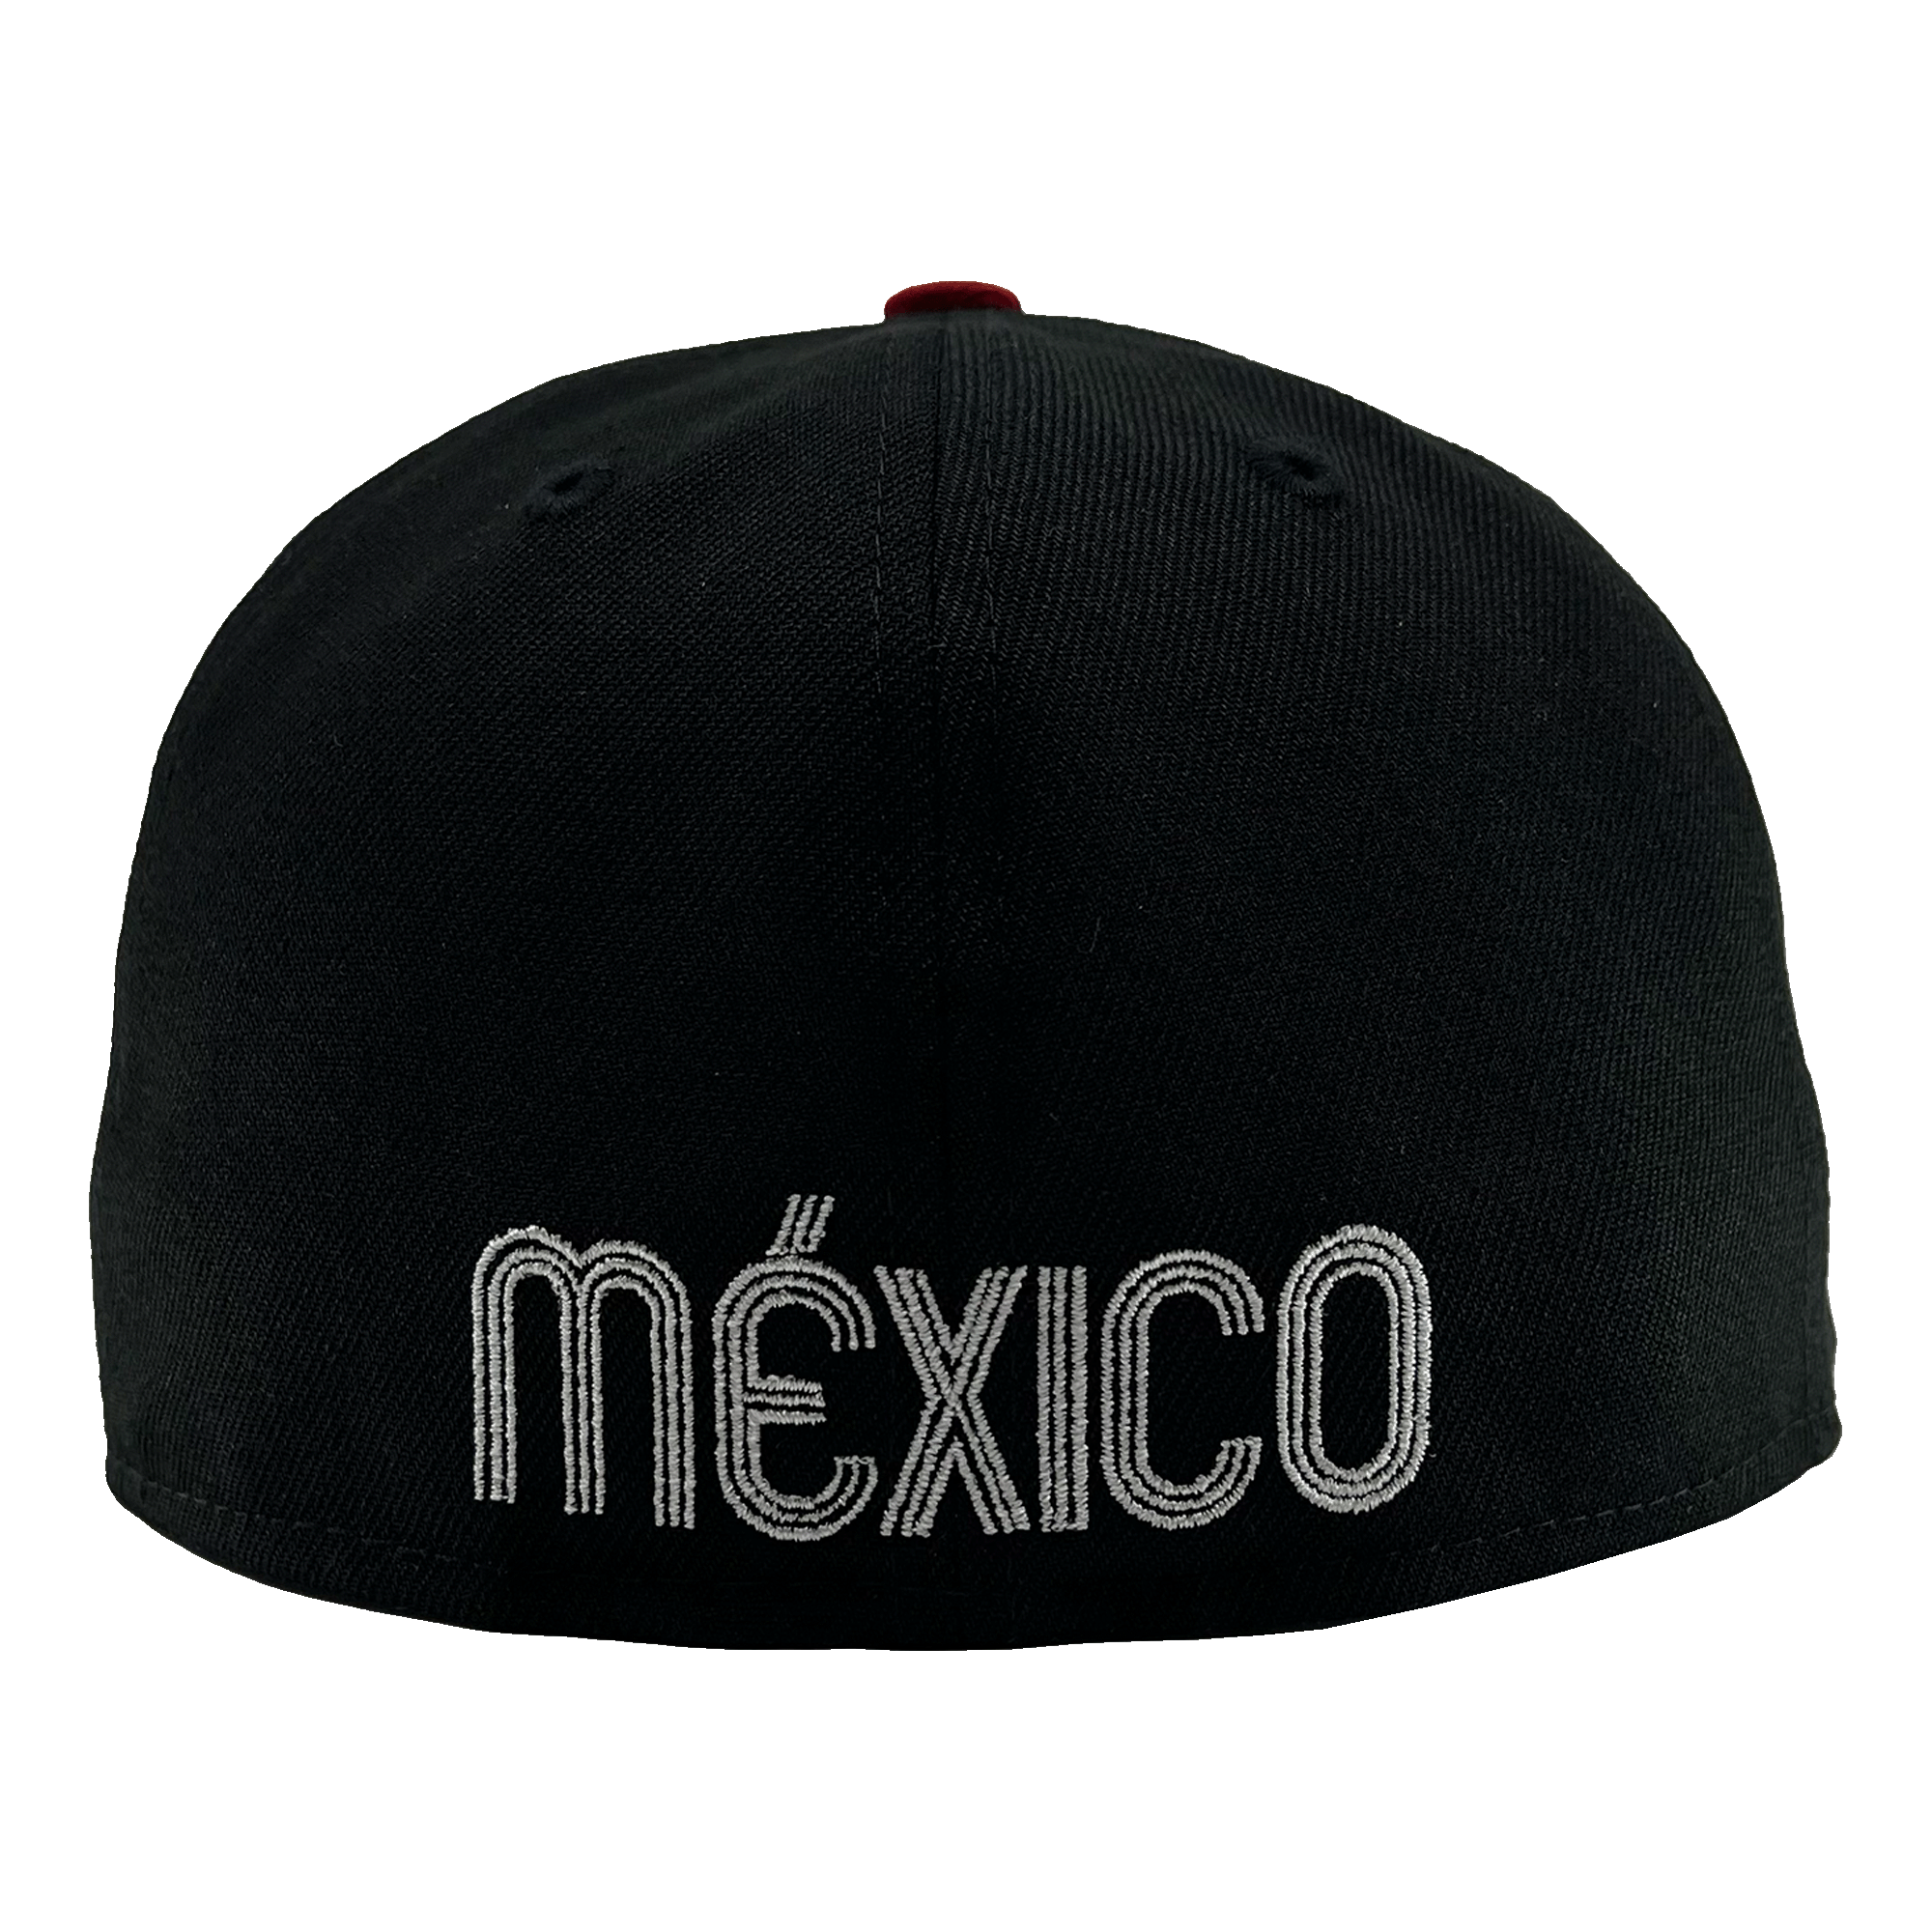 Mexico embroidered on back of black 5950.